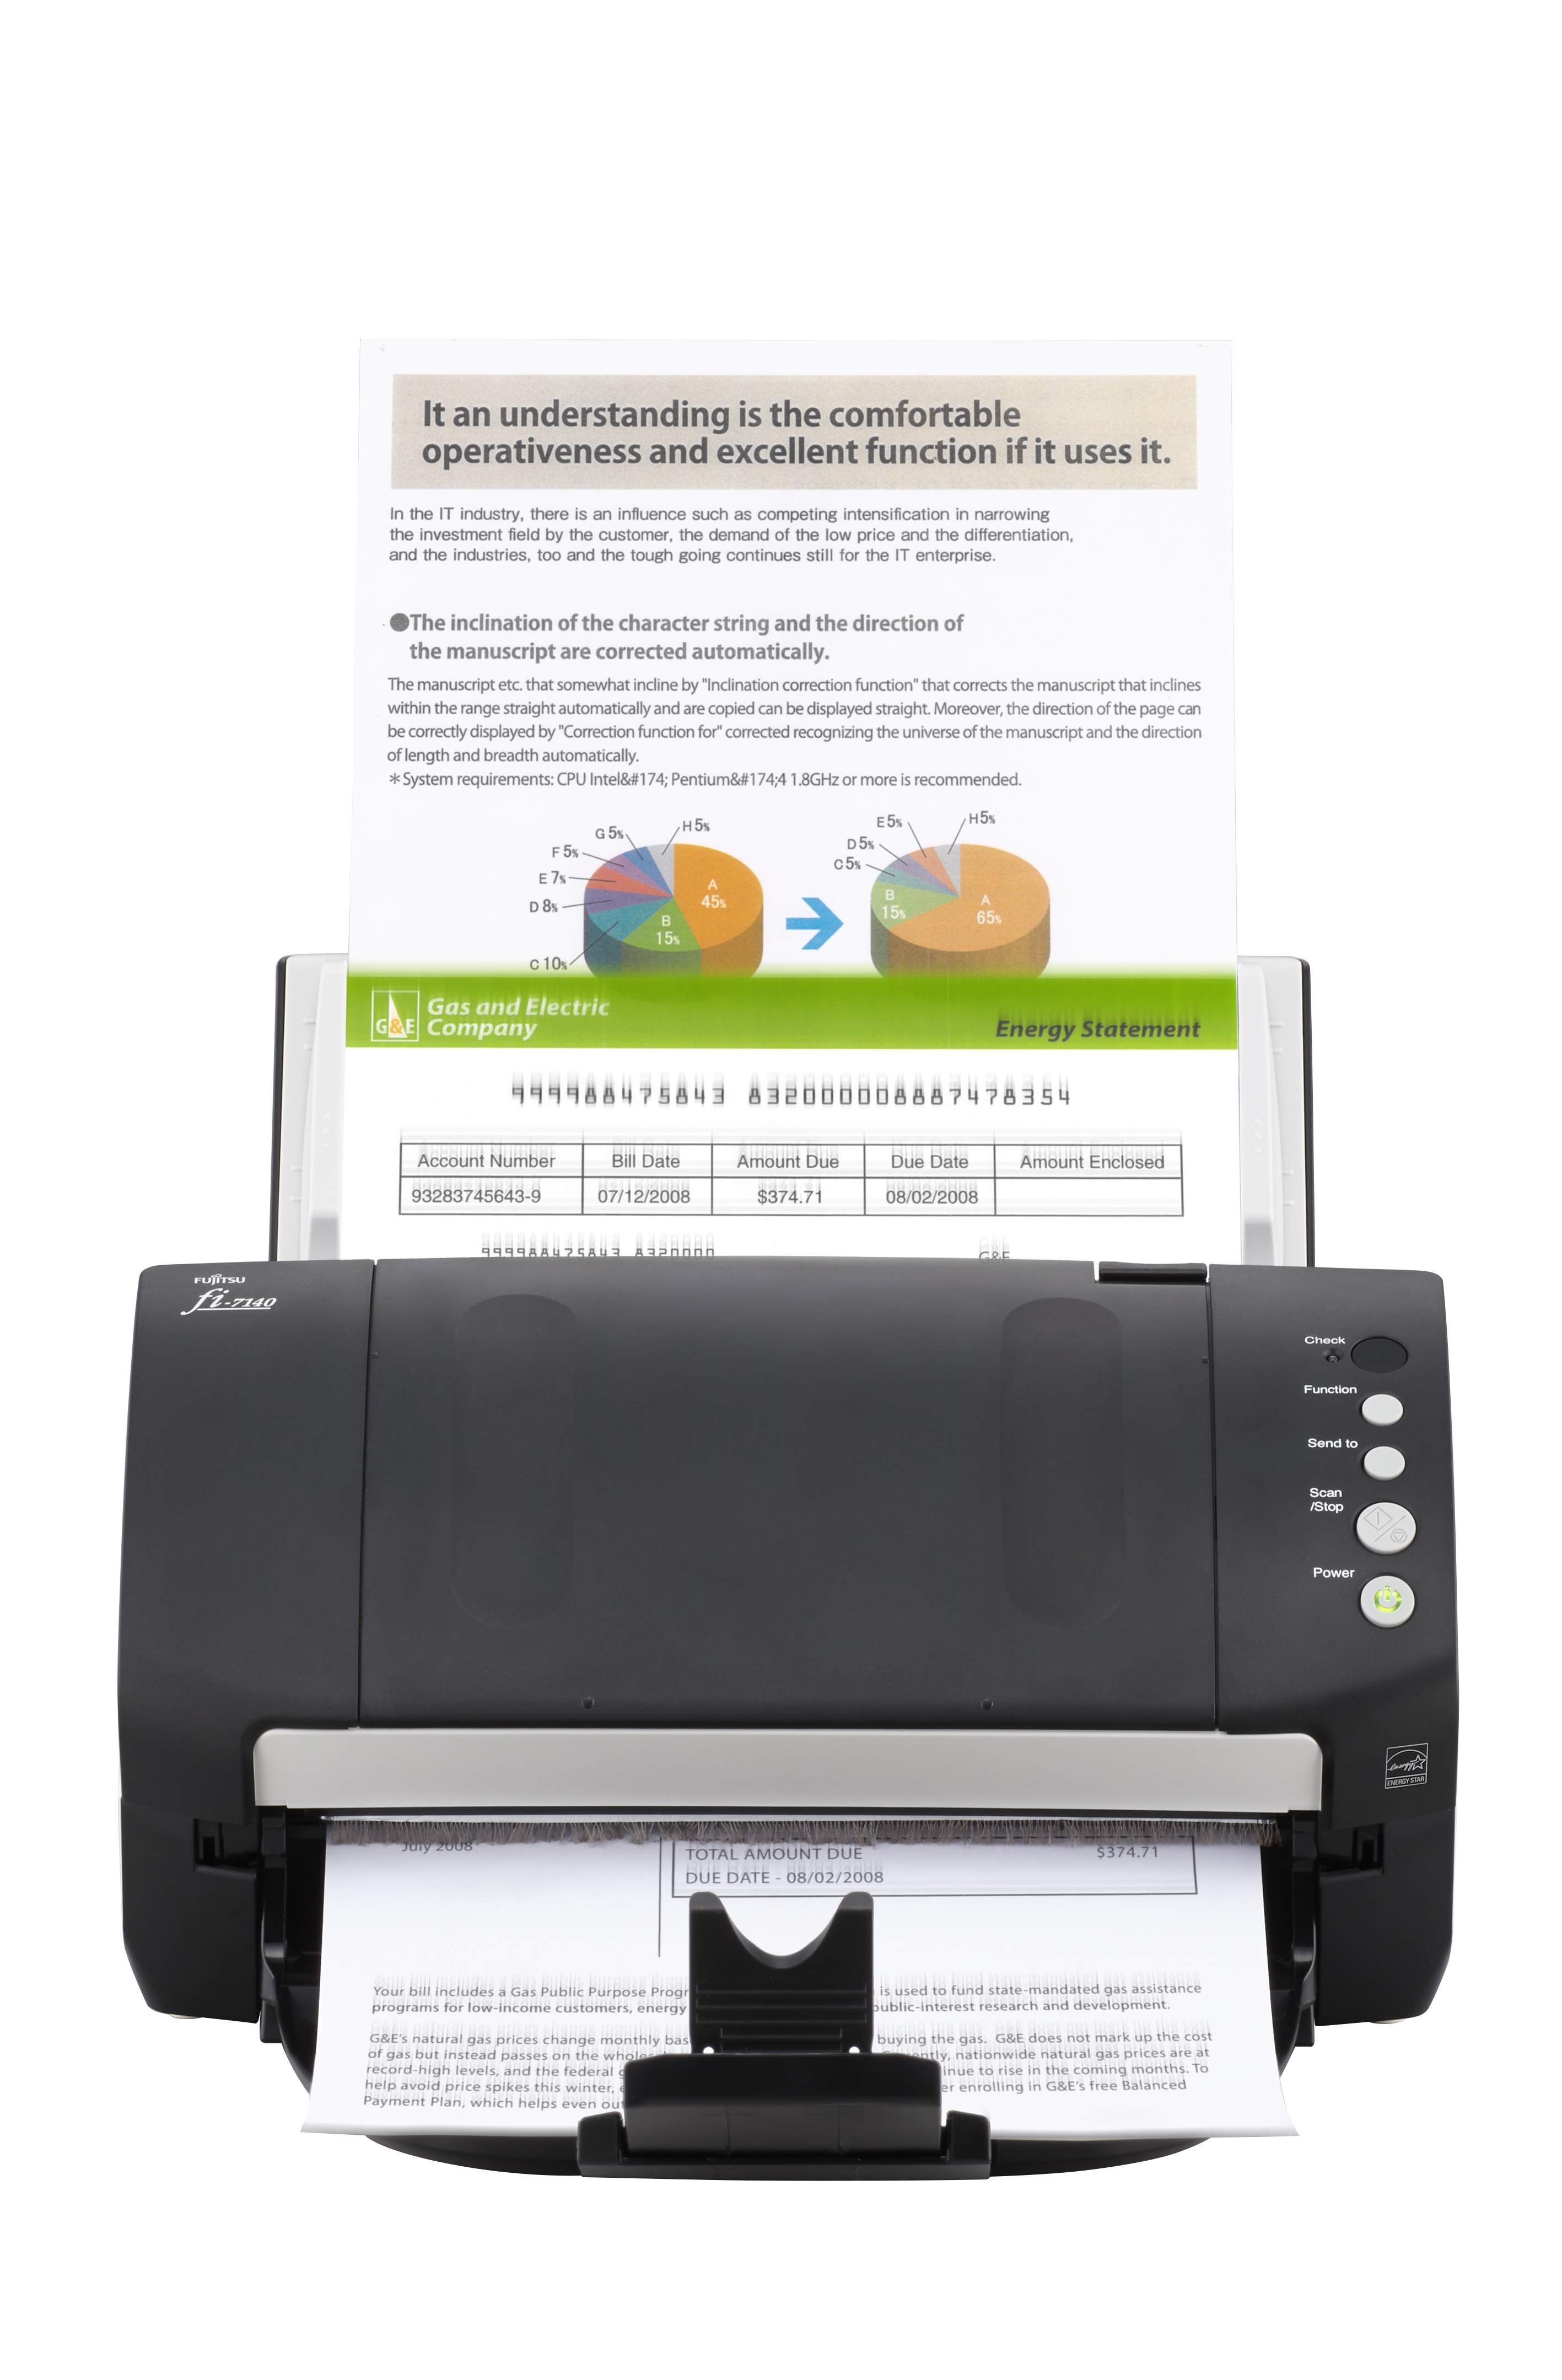 Fujitsu fi-7140 - Document scanner - Dual CCD - Duplex - 8.5 in x 14 in - 600 dpi x 600 dpi - up to 40 ppm (mono) / up to 40 ppm (color) - ADF (80 sheets) - USB 2.0